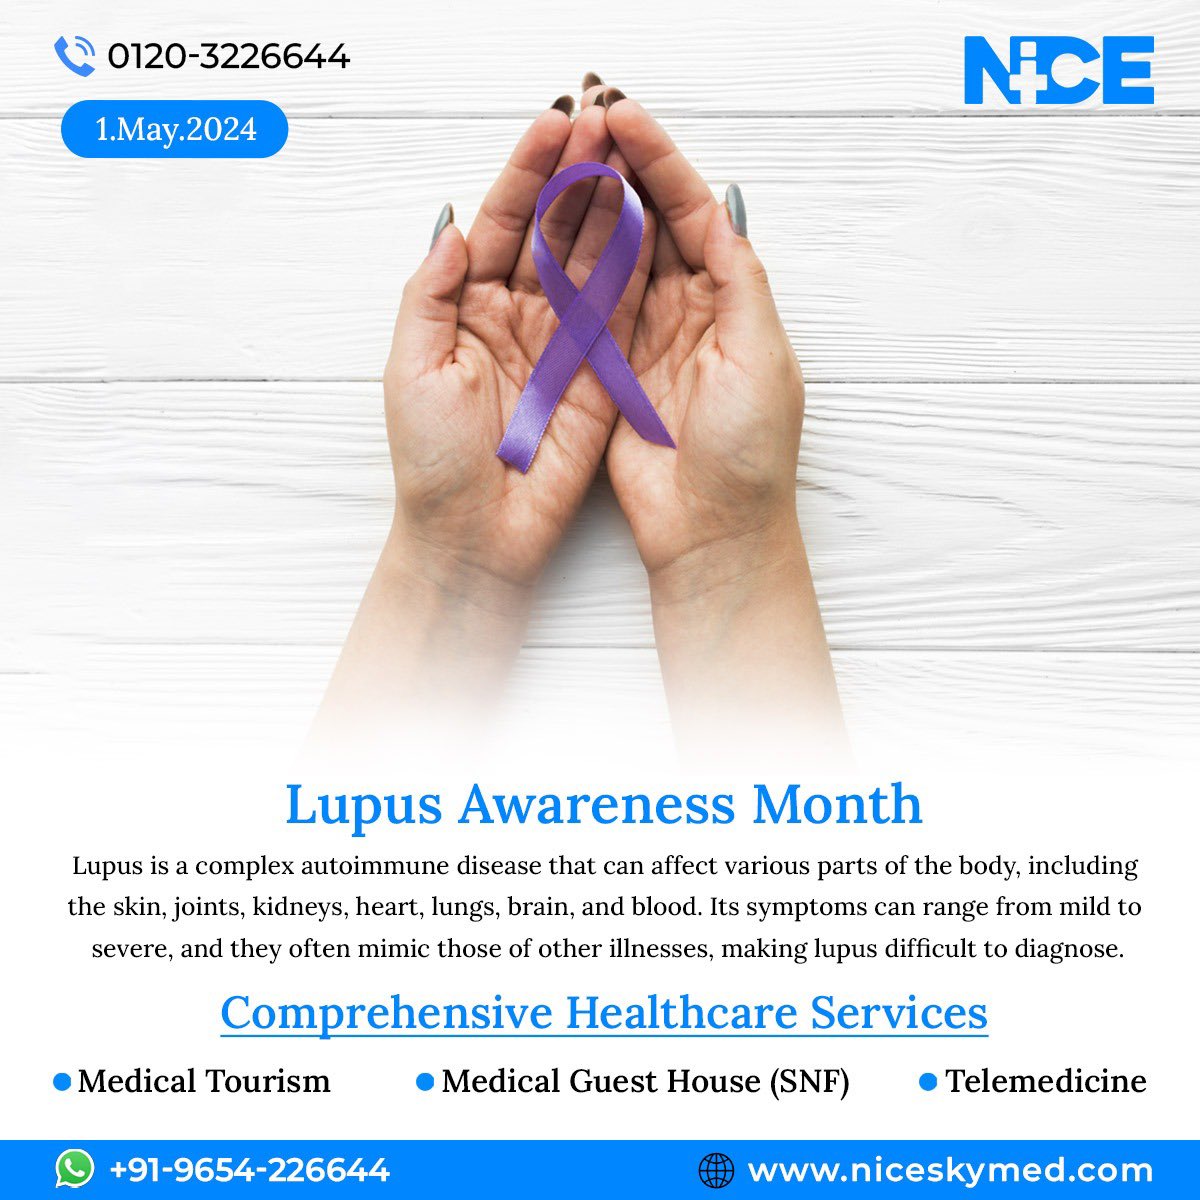 May is Lupus Awareness Month 💜 Let's spread knowledge, support, and hope for those living with lupus. Together, we can shine a light on this often misunderstood autoimmune disease. #LupusAwareness #Telemedicine #Telecare #TelehealthNow #TelehealthBenefits #GuestHouse  #MedGuest